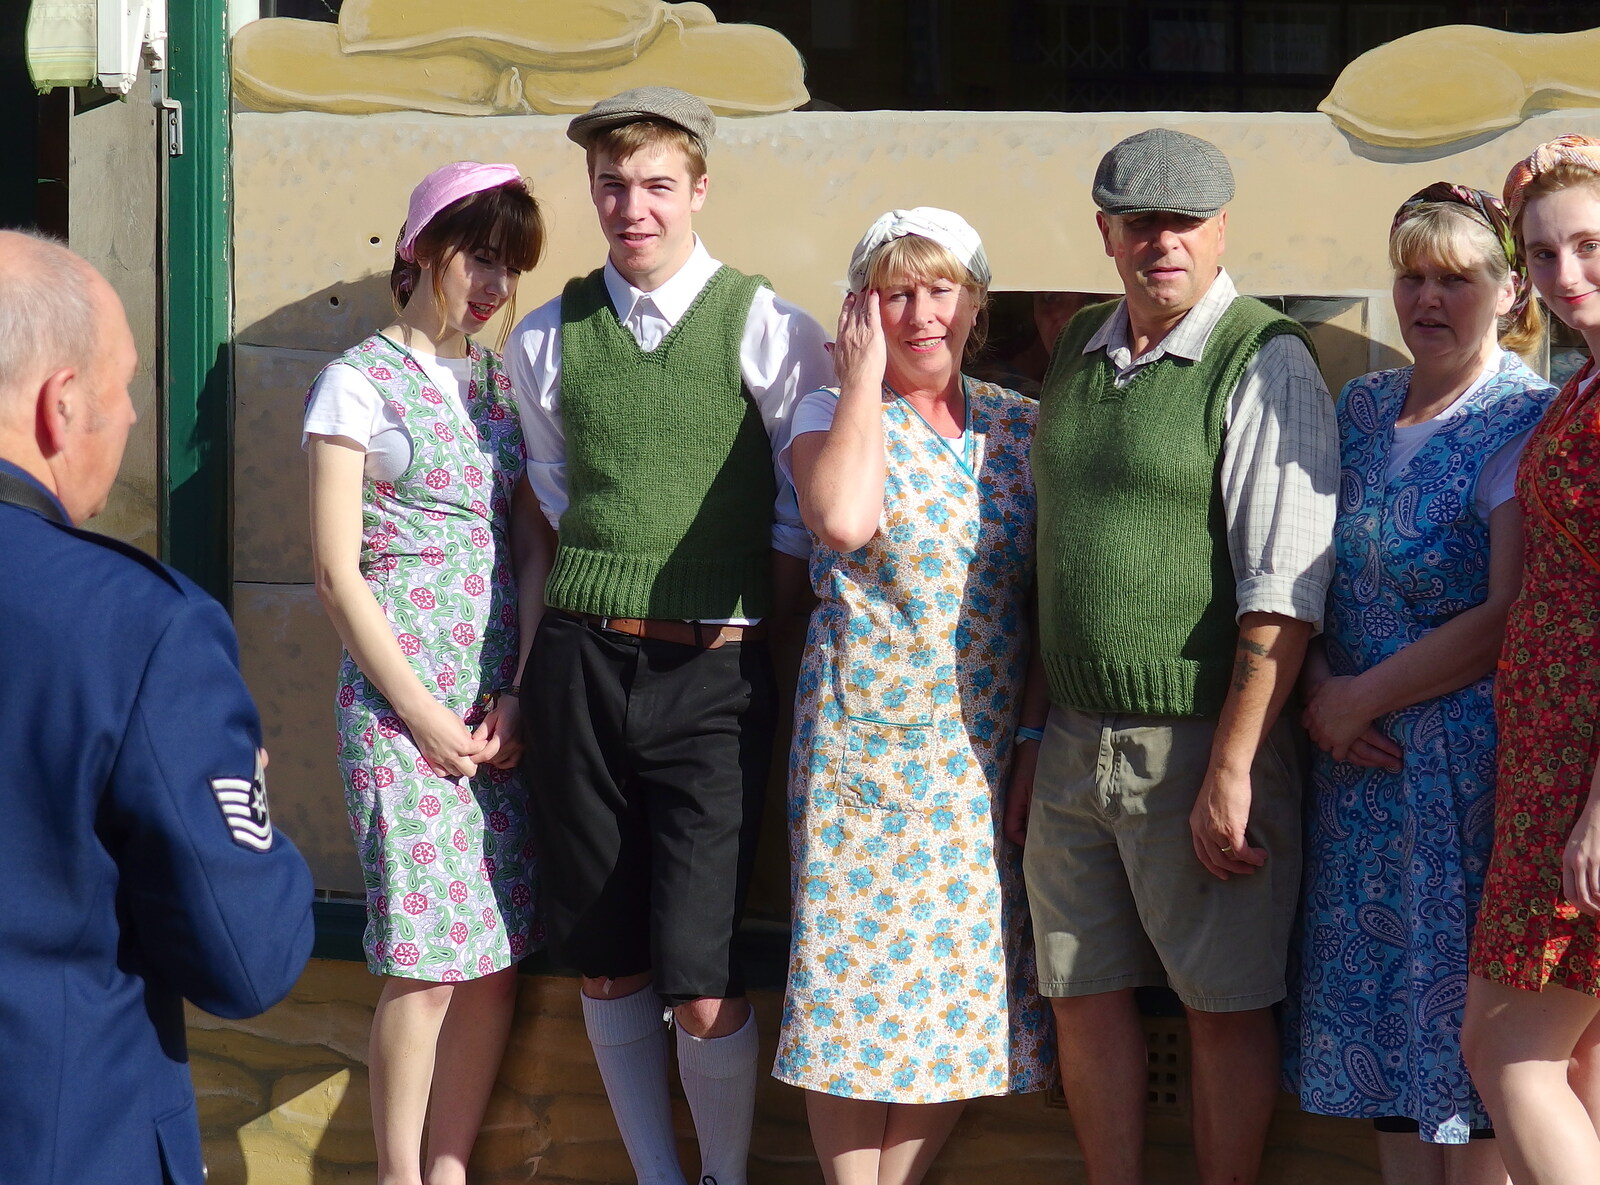 Some 1940s shop workers from Paul Bear's Adventures at a 1940s Steam Weekend, Holt, Norfolk - 22nd September 2013